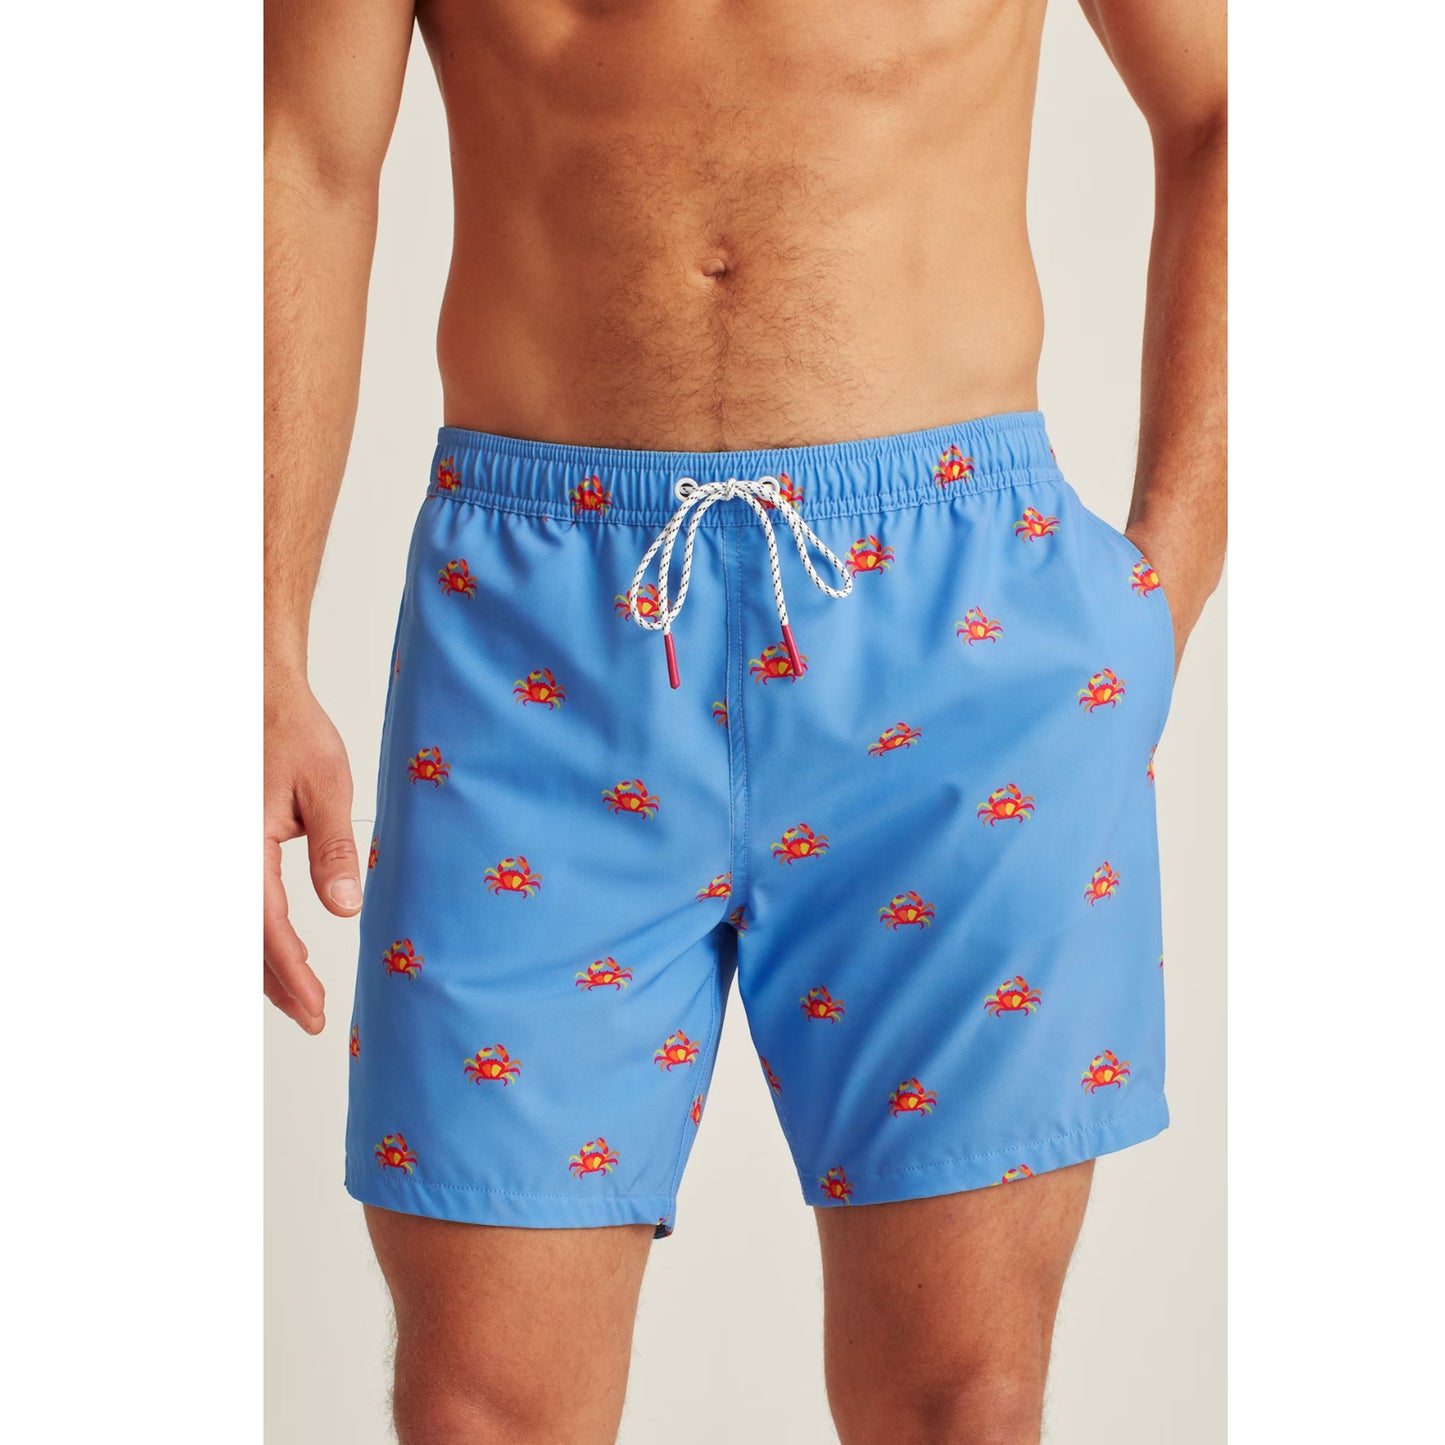 Bonobos Riviera Recycled Swim Trunks Colorful Crabs Printed Shorts